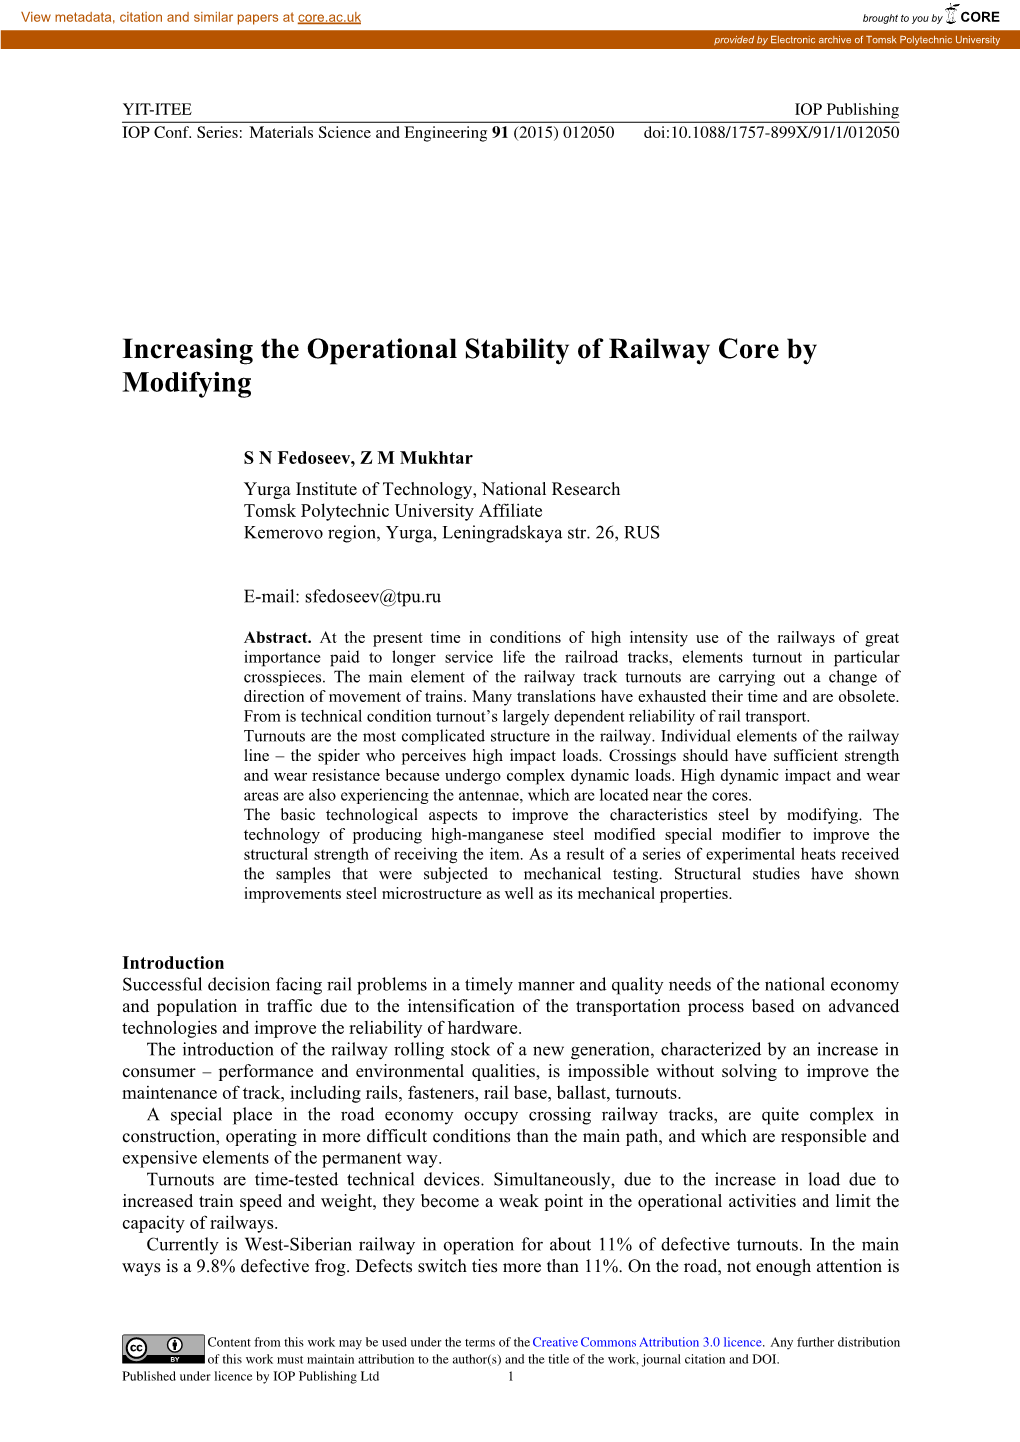 Increasing the Operational Stability of Railway Core by Modifying